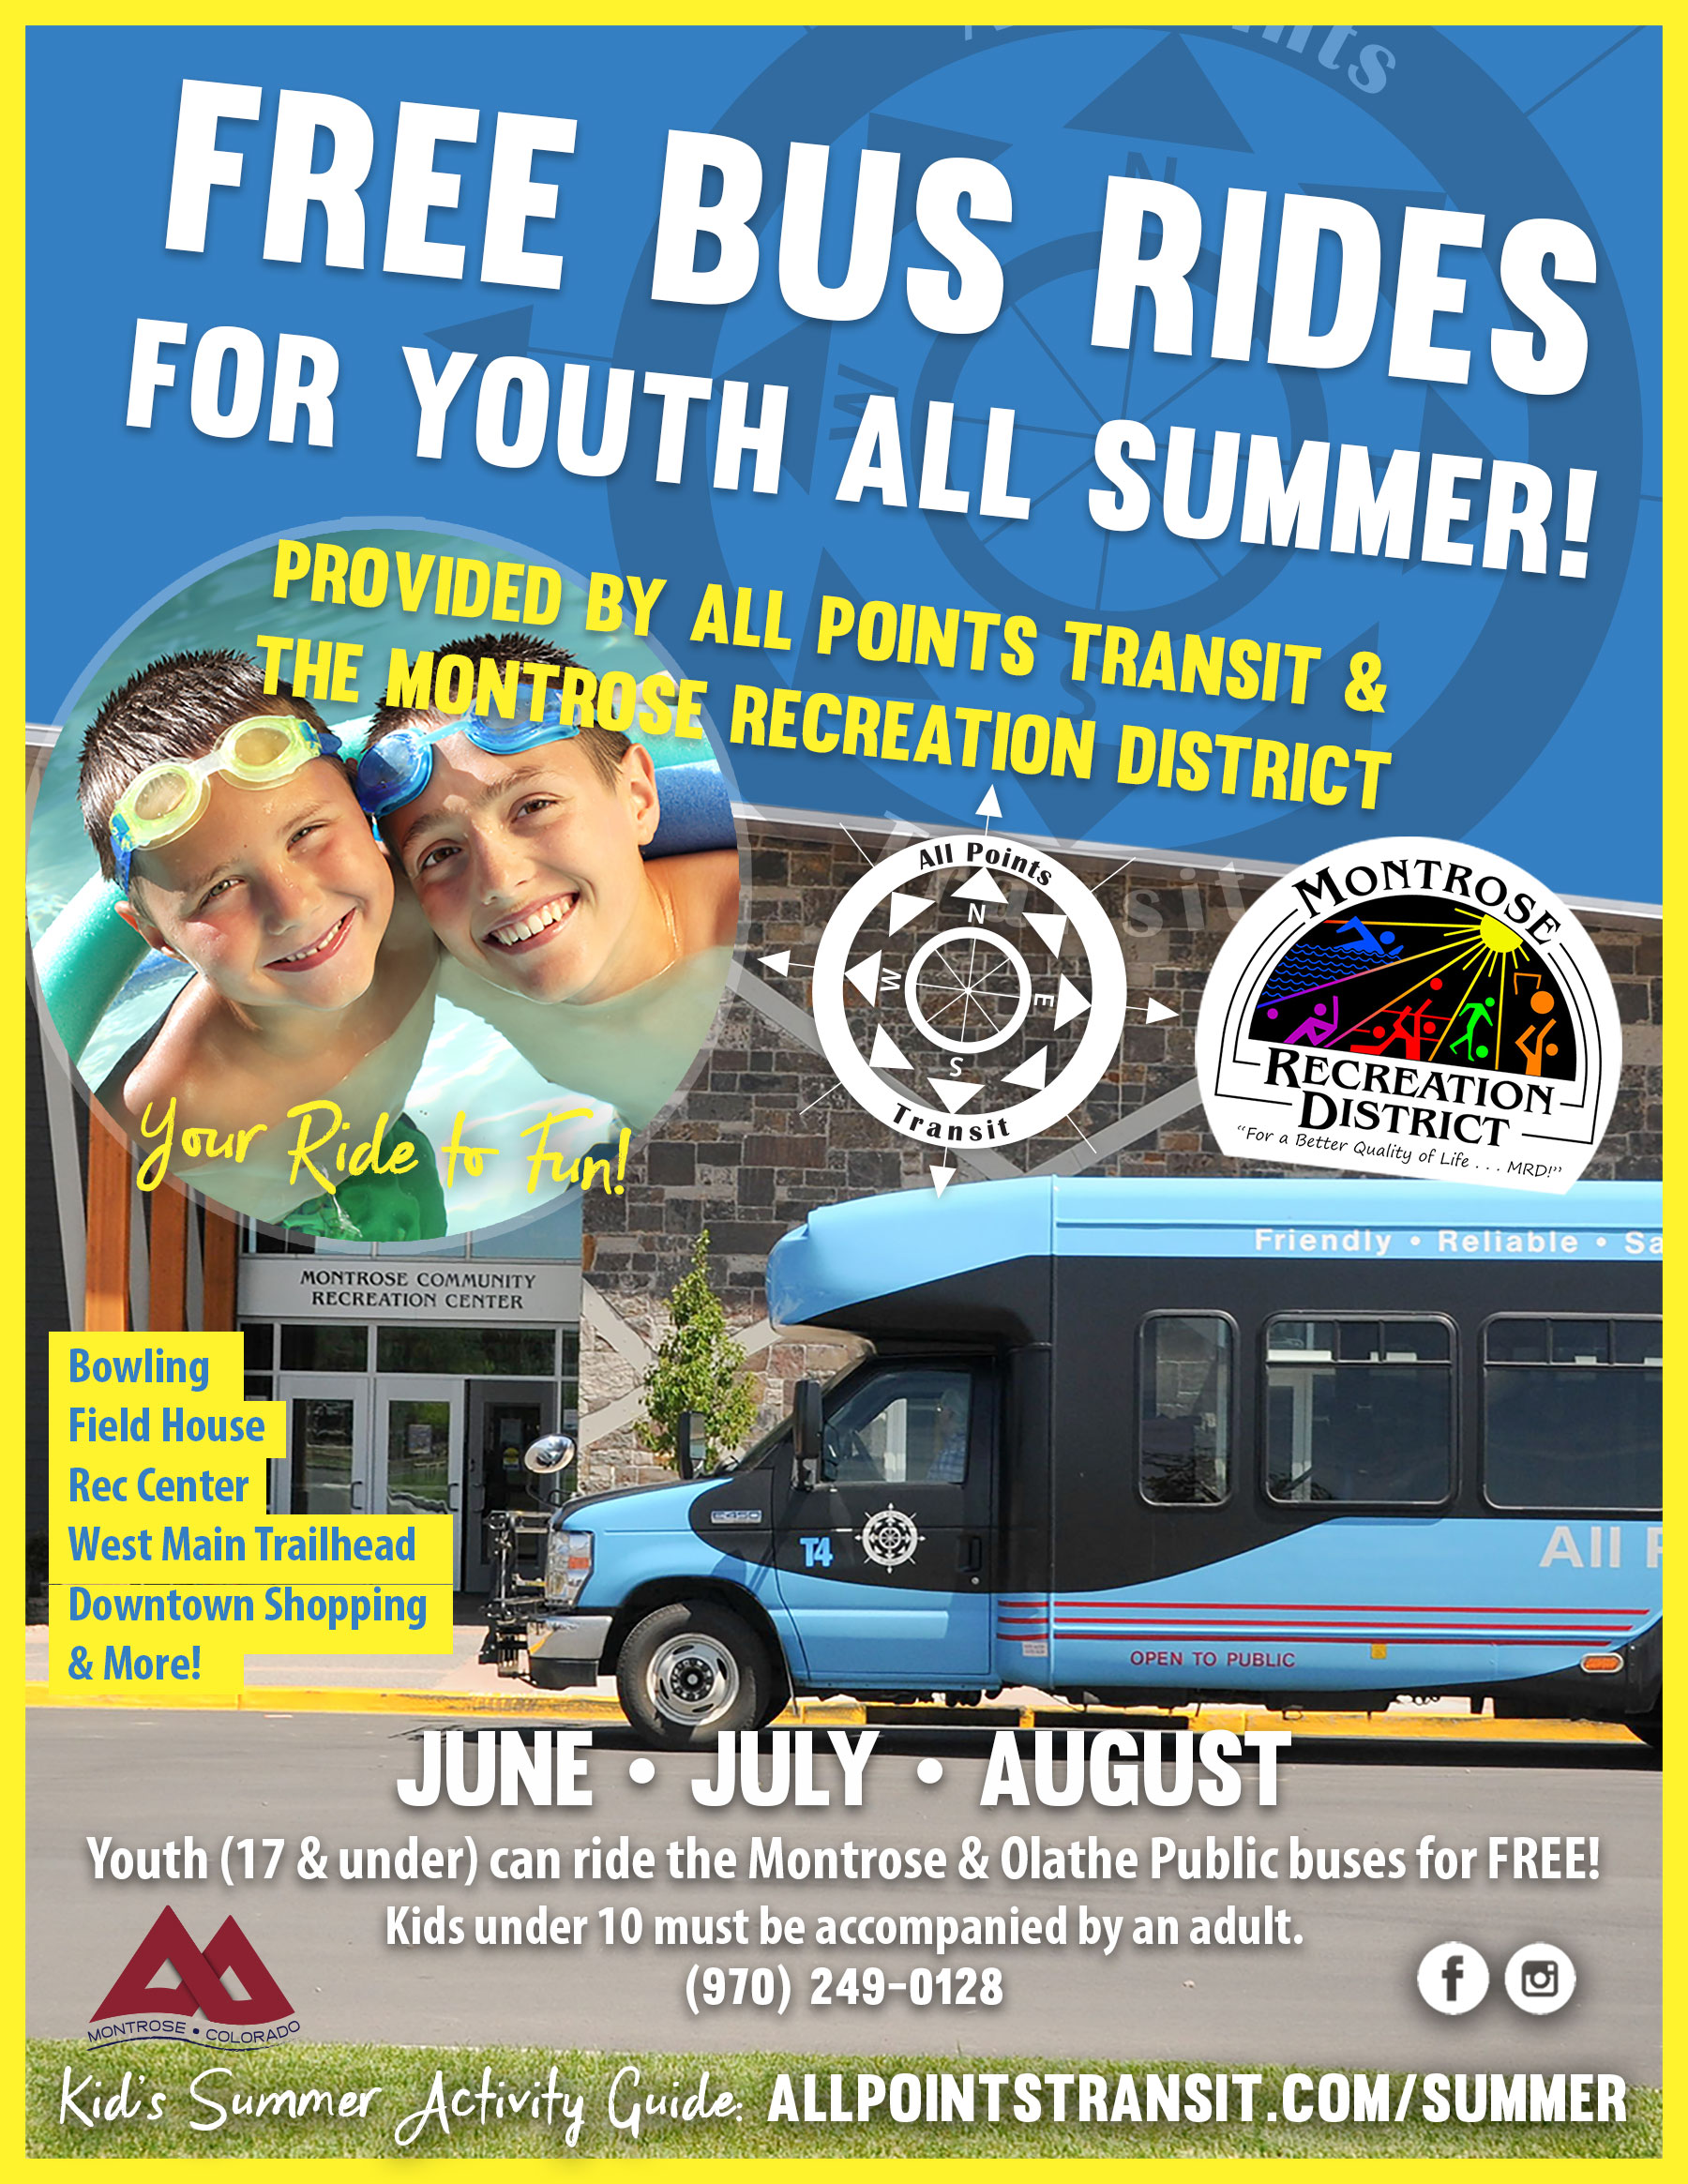 free public bus rides for kids during the summer in montrose